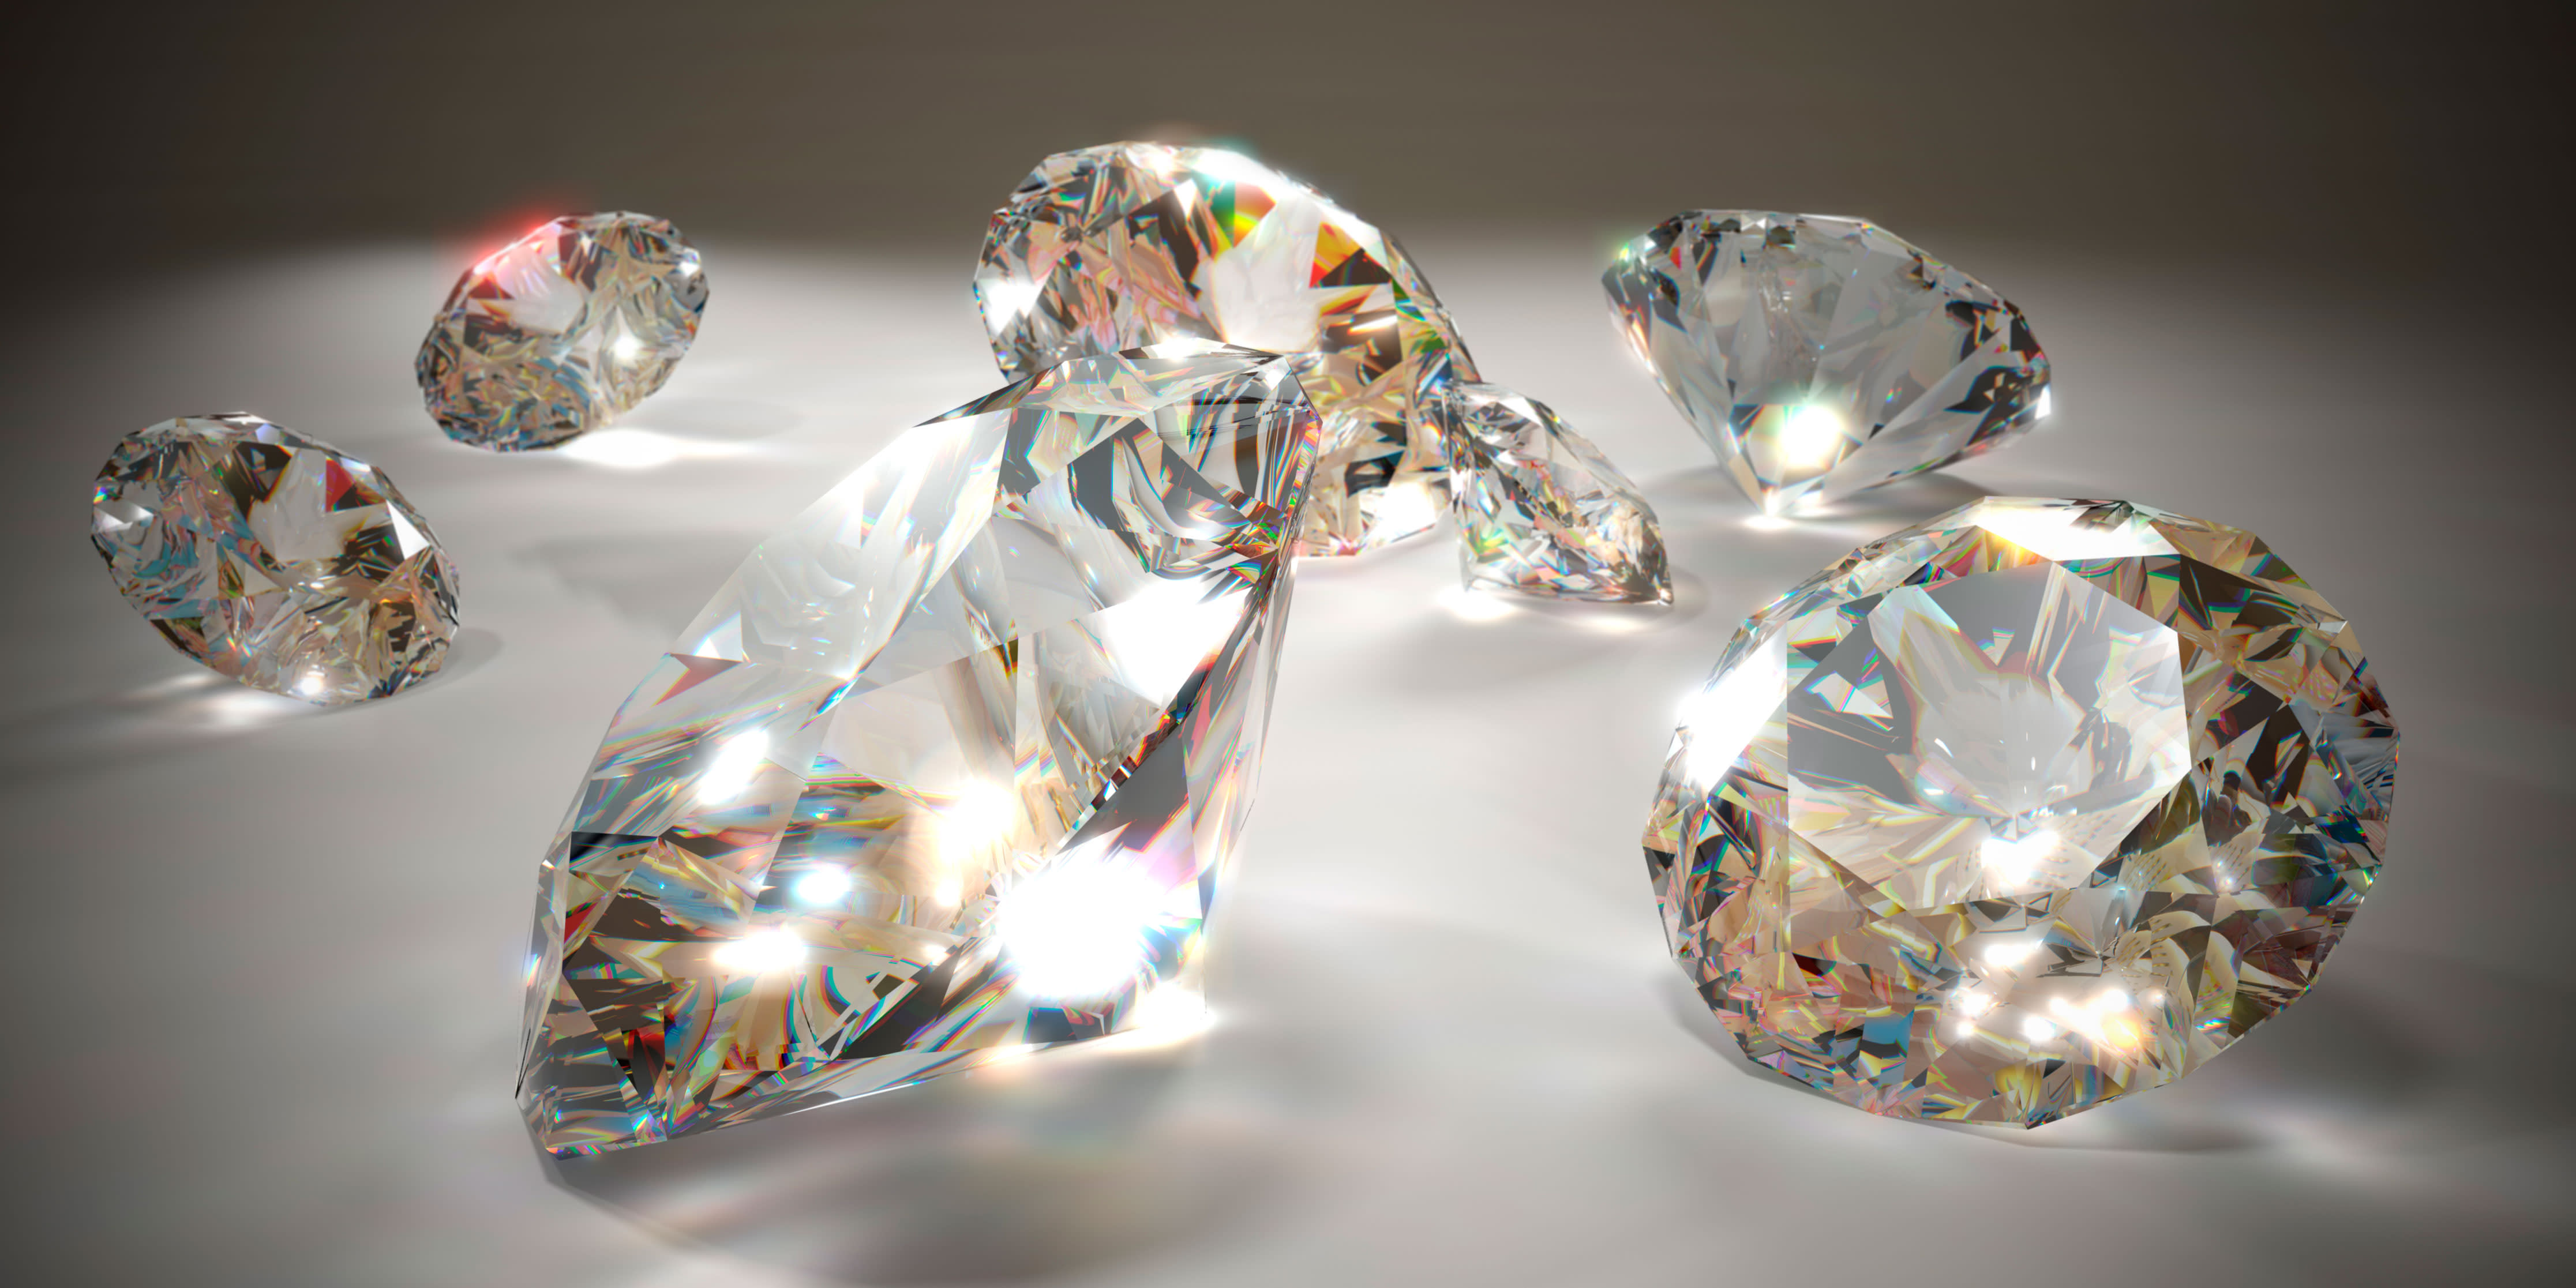 Diamond Miners Meet in Private to Discuss Fake Gems Issue - Bloomberg